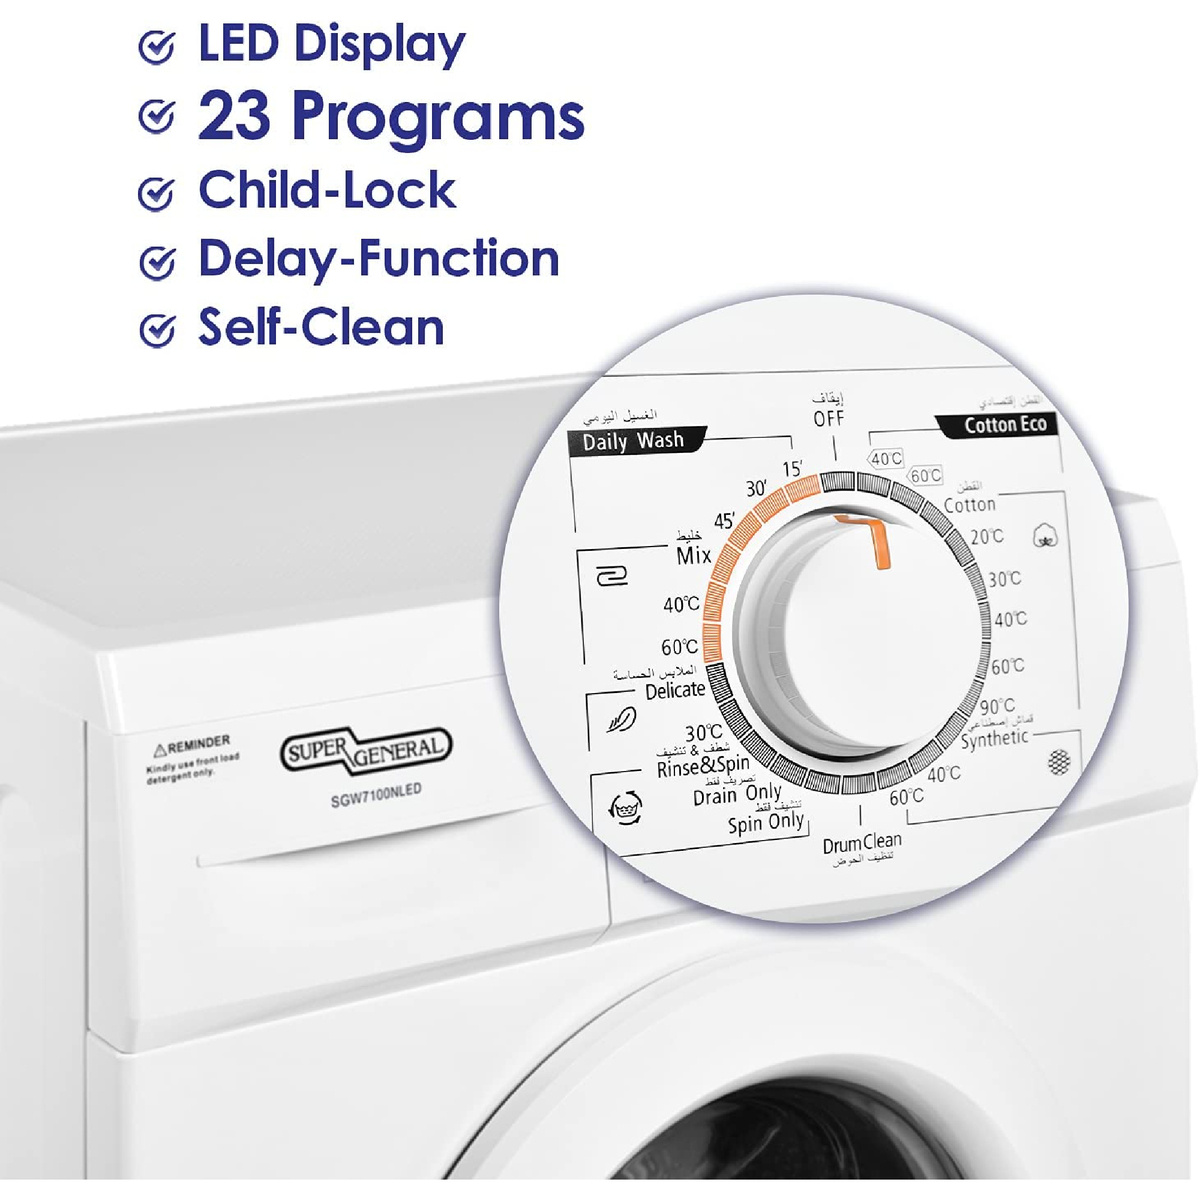 Super General 7 kg Front Load Washing Machine, 1200 RPM, White, SGW 7100NLED